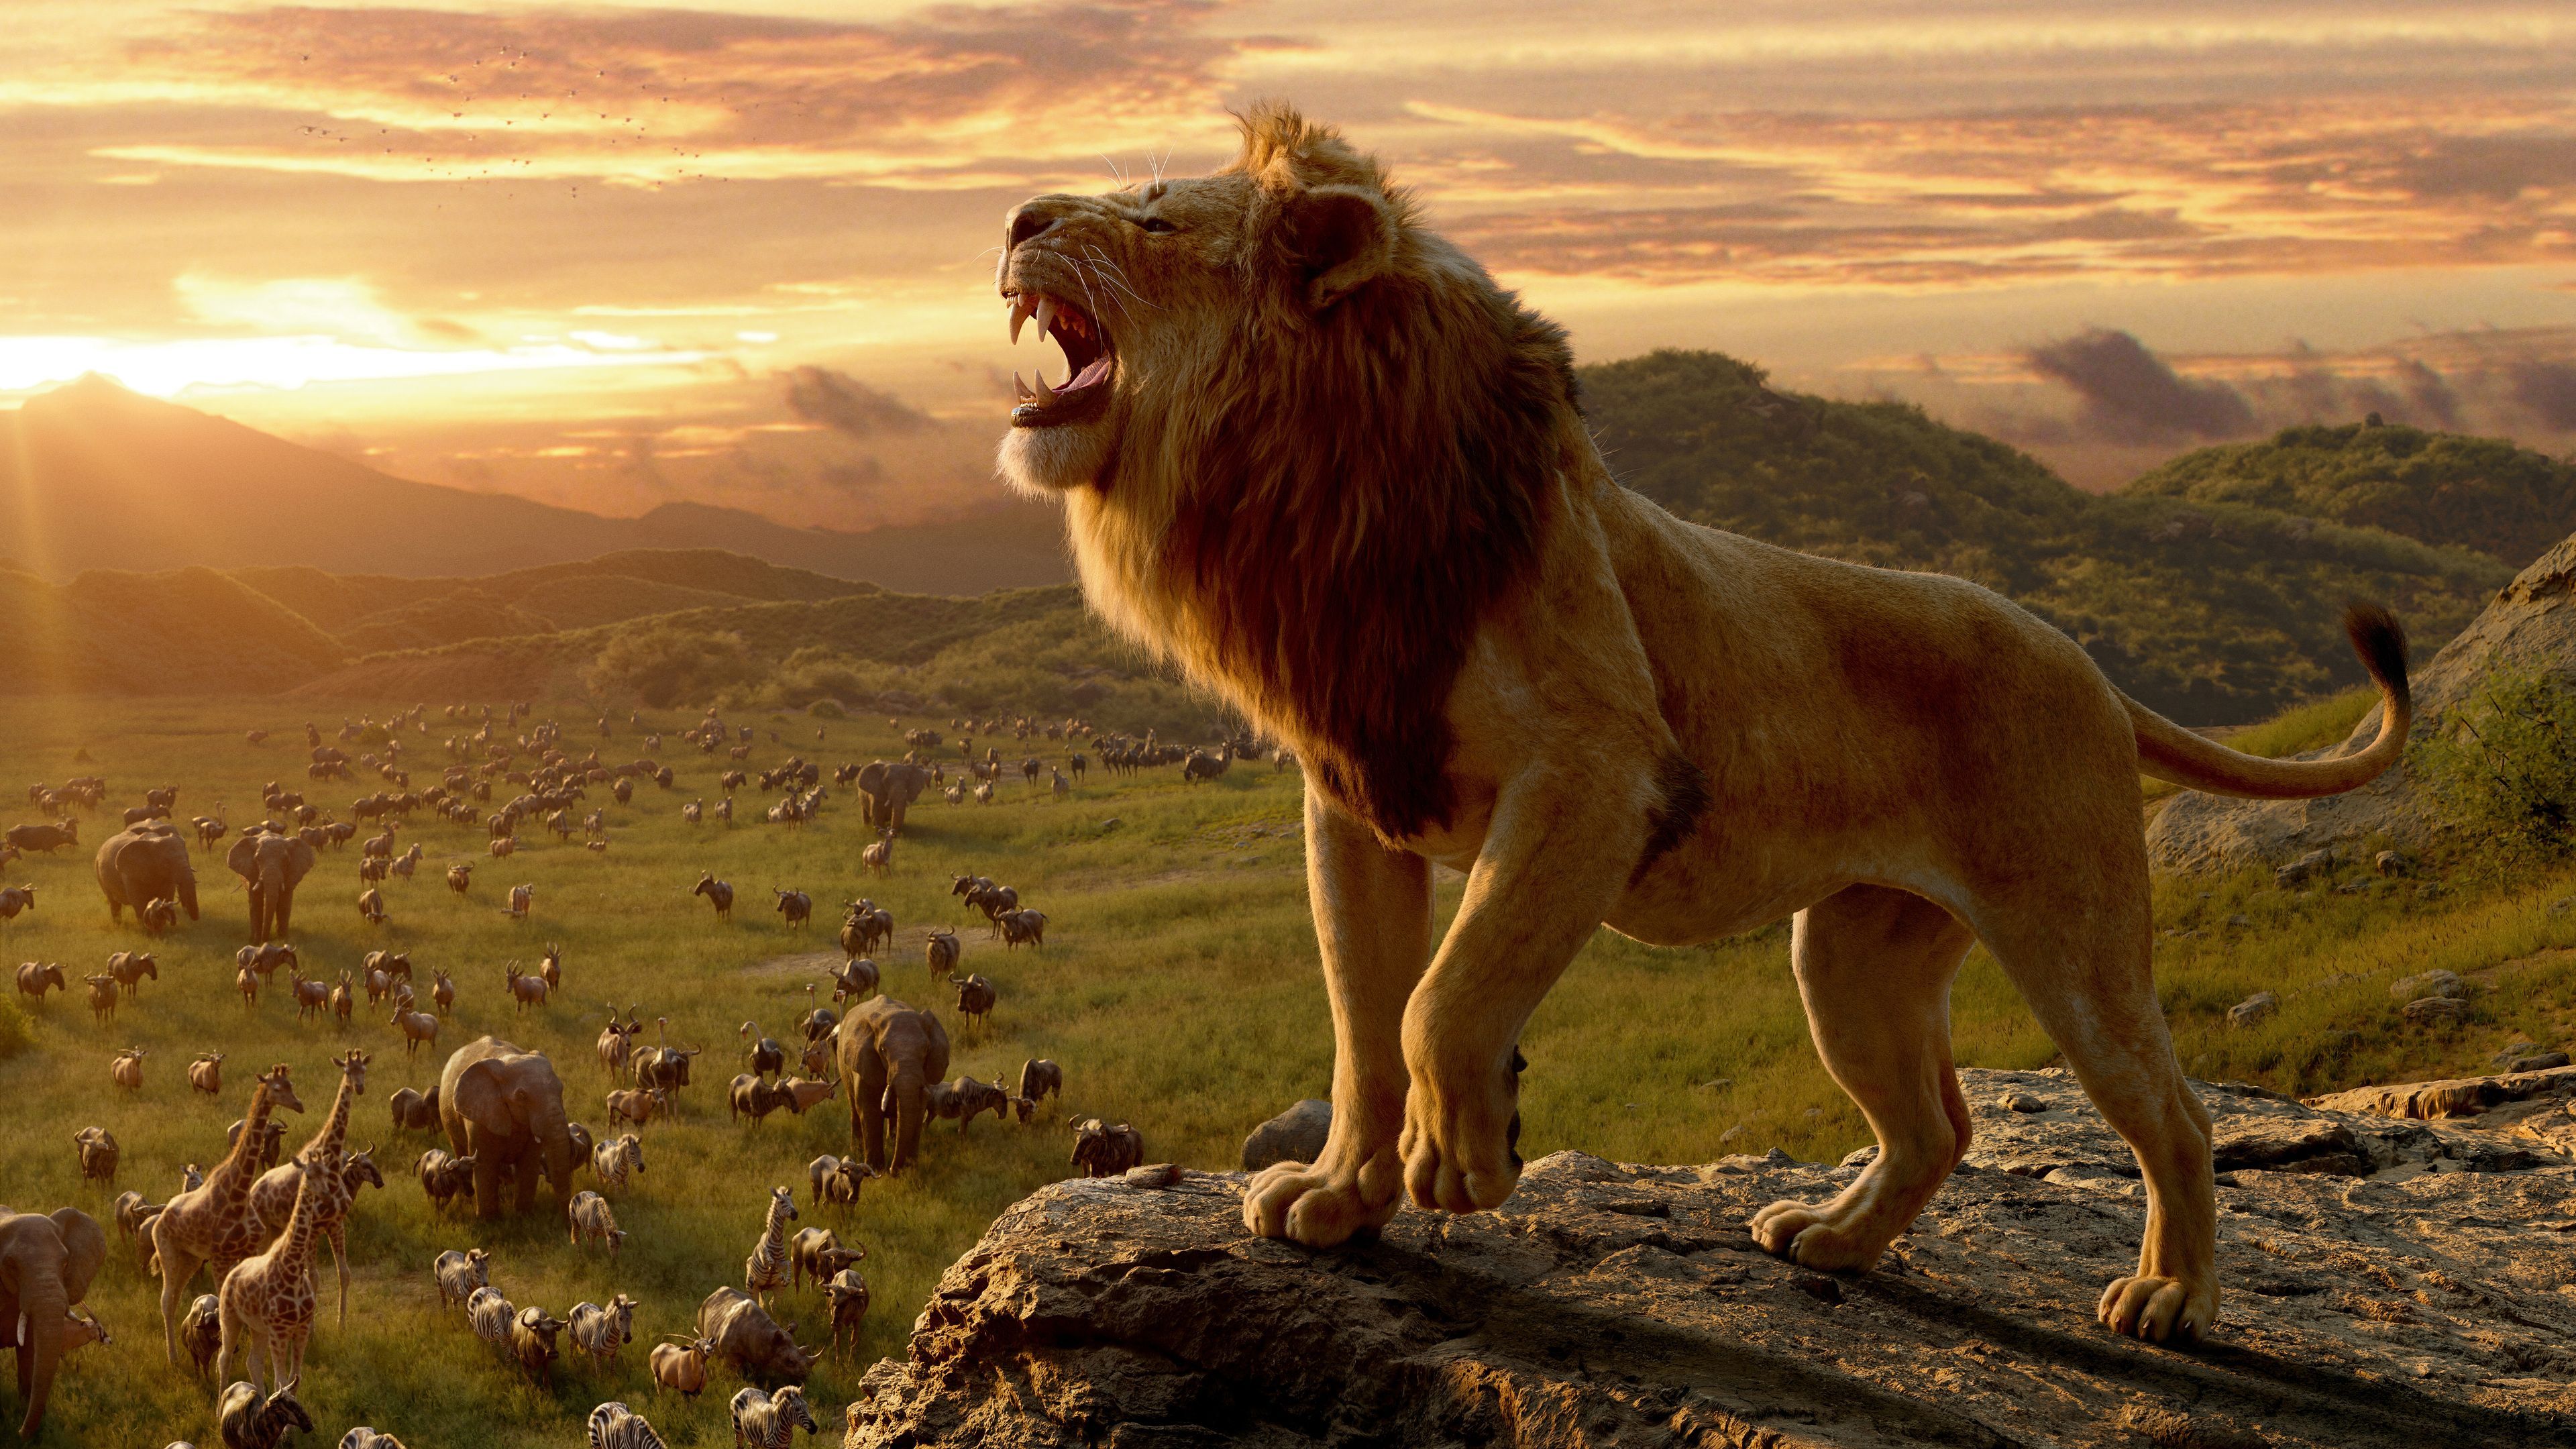 The Lion King Movie the lion king wallpapers, movies wallpapers, lion wallpapers, hd